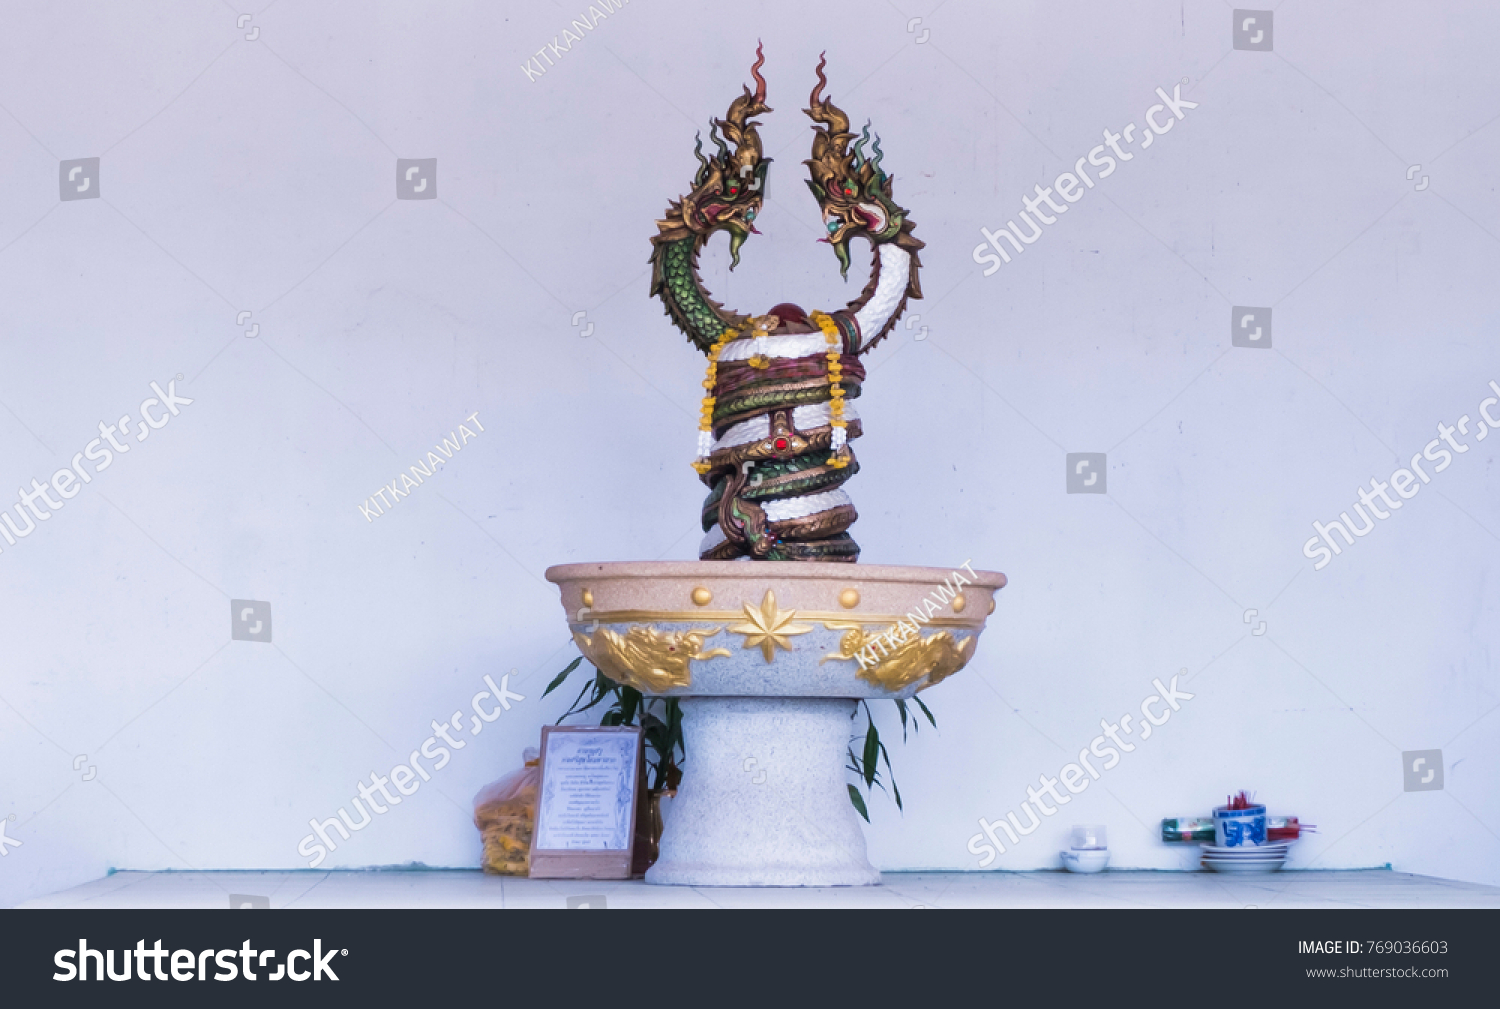 Two Naga statue in pot on the cement floor. white concrete background. #769036603